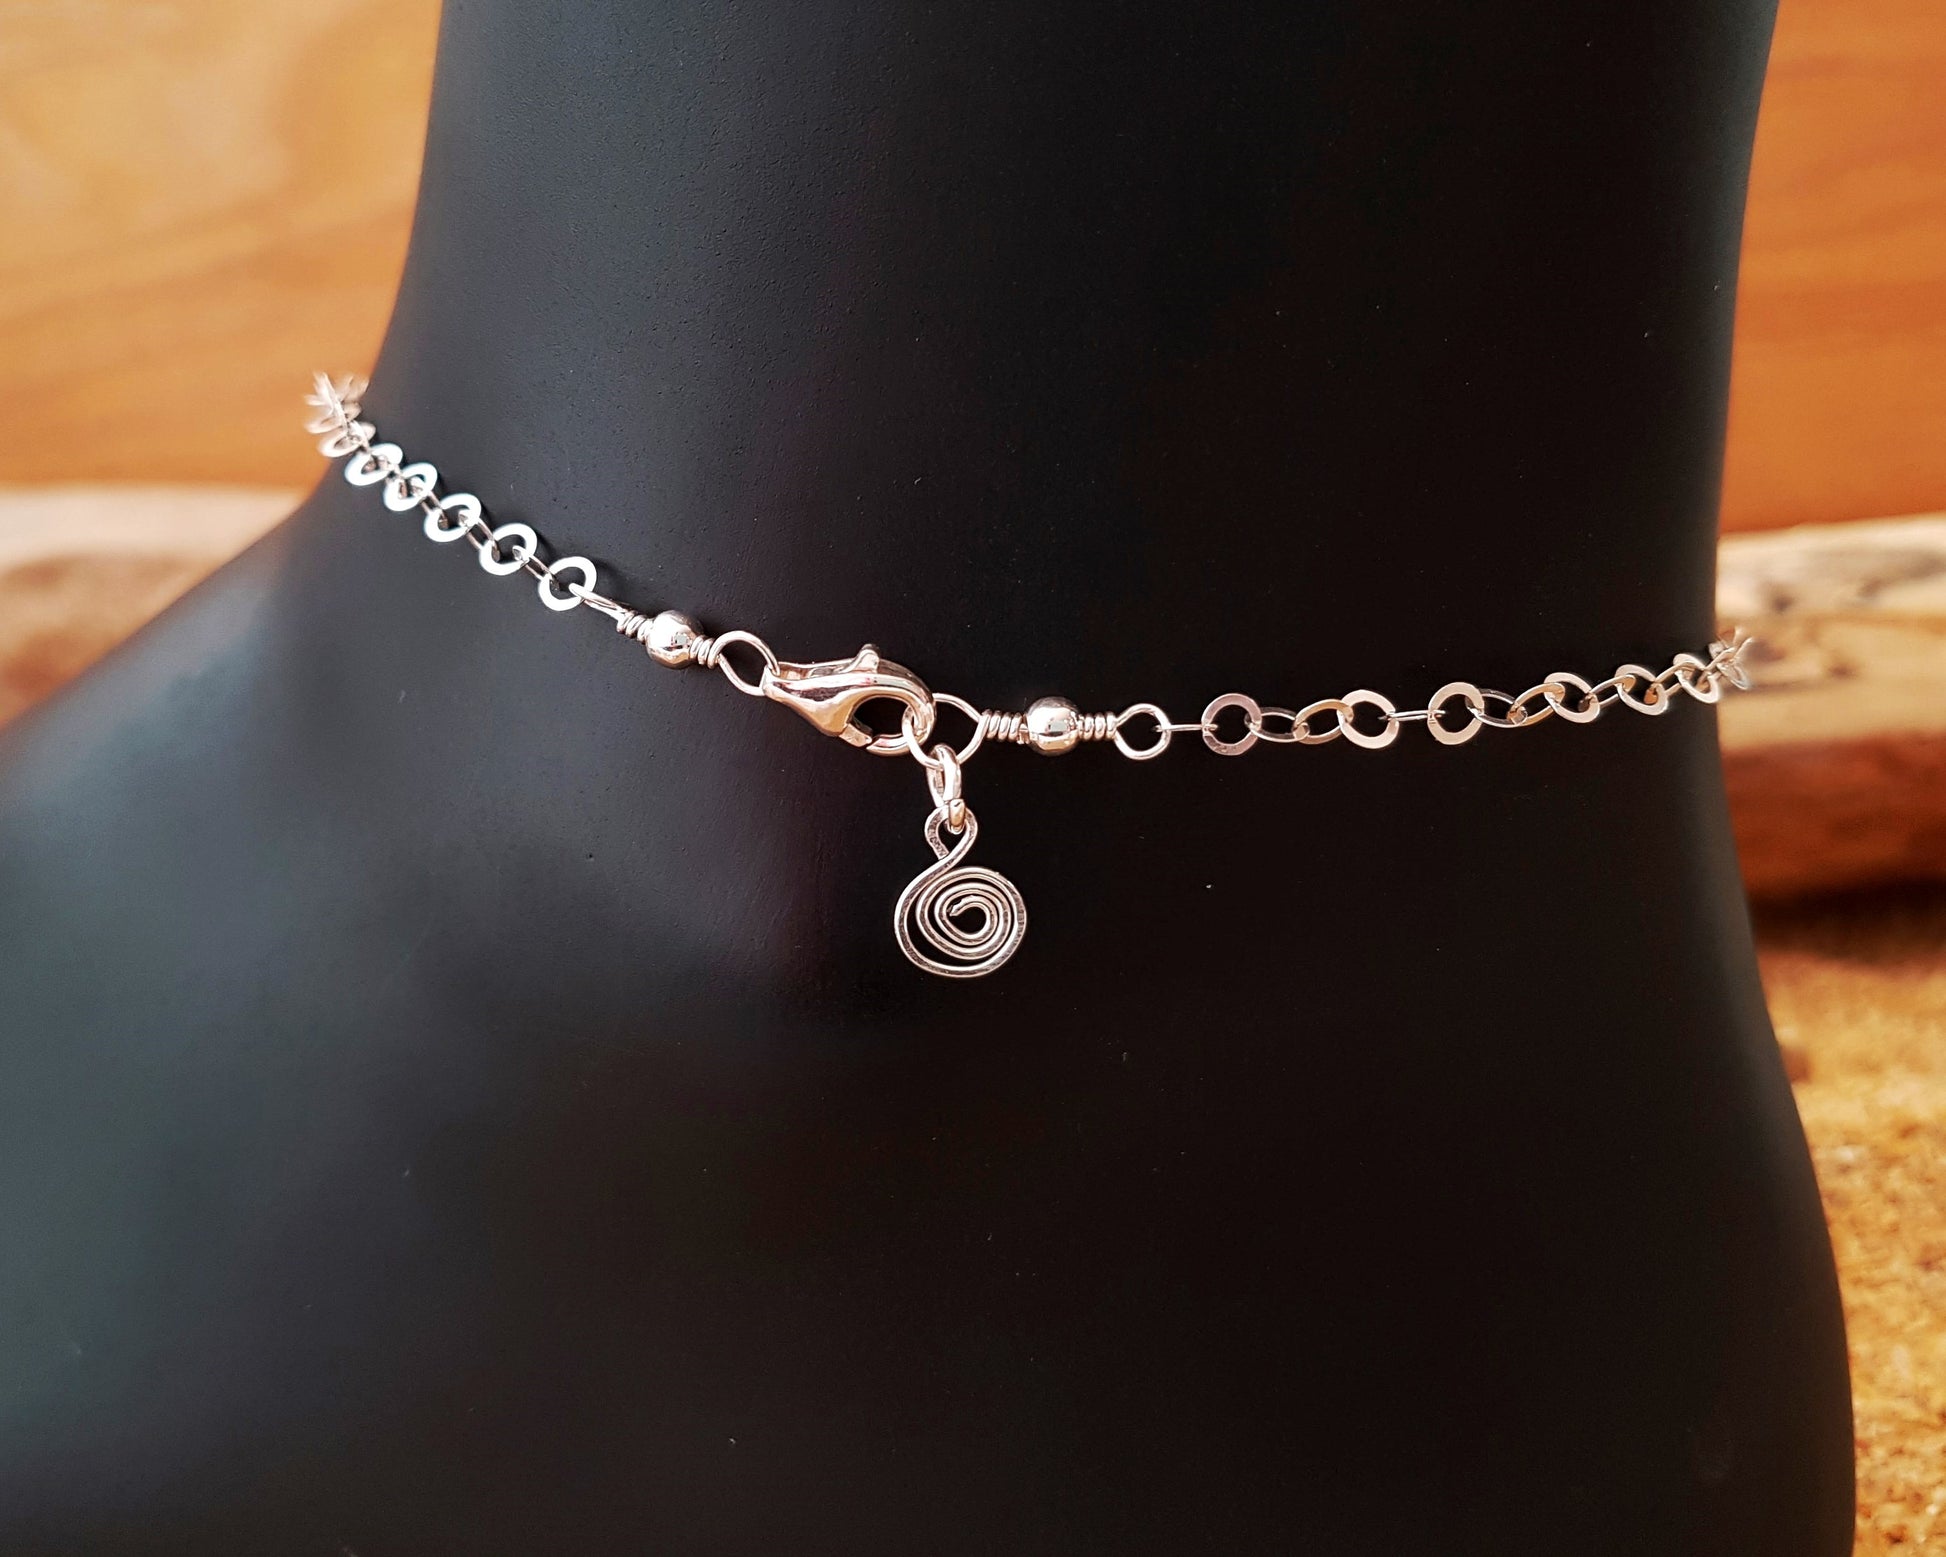 Deluxe Personalized Dragonfly, Eternity, Initial, Birthstone Ankle Bracelet-Anklet -Sterling Silver- Crystal Birthstones-Hand stamped Initial pendants on Sparkly Chain